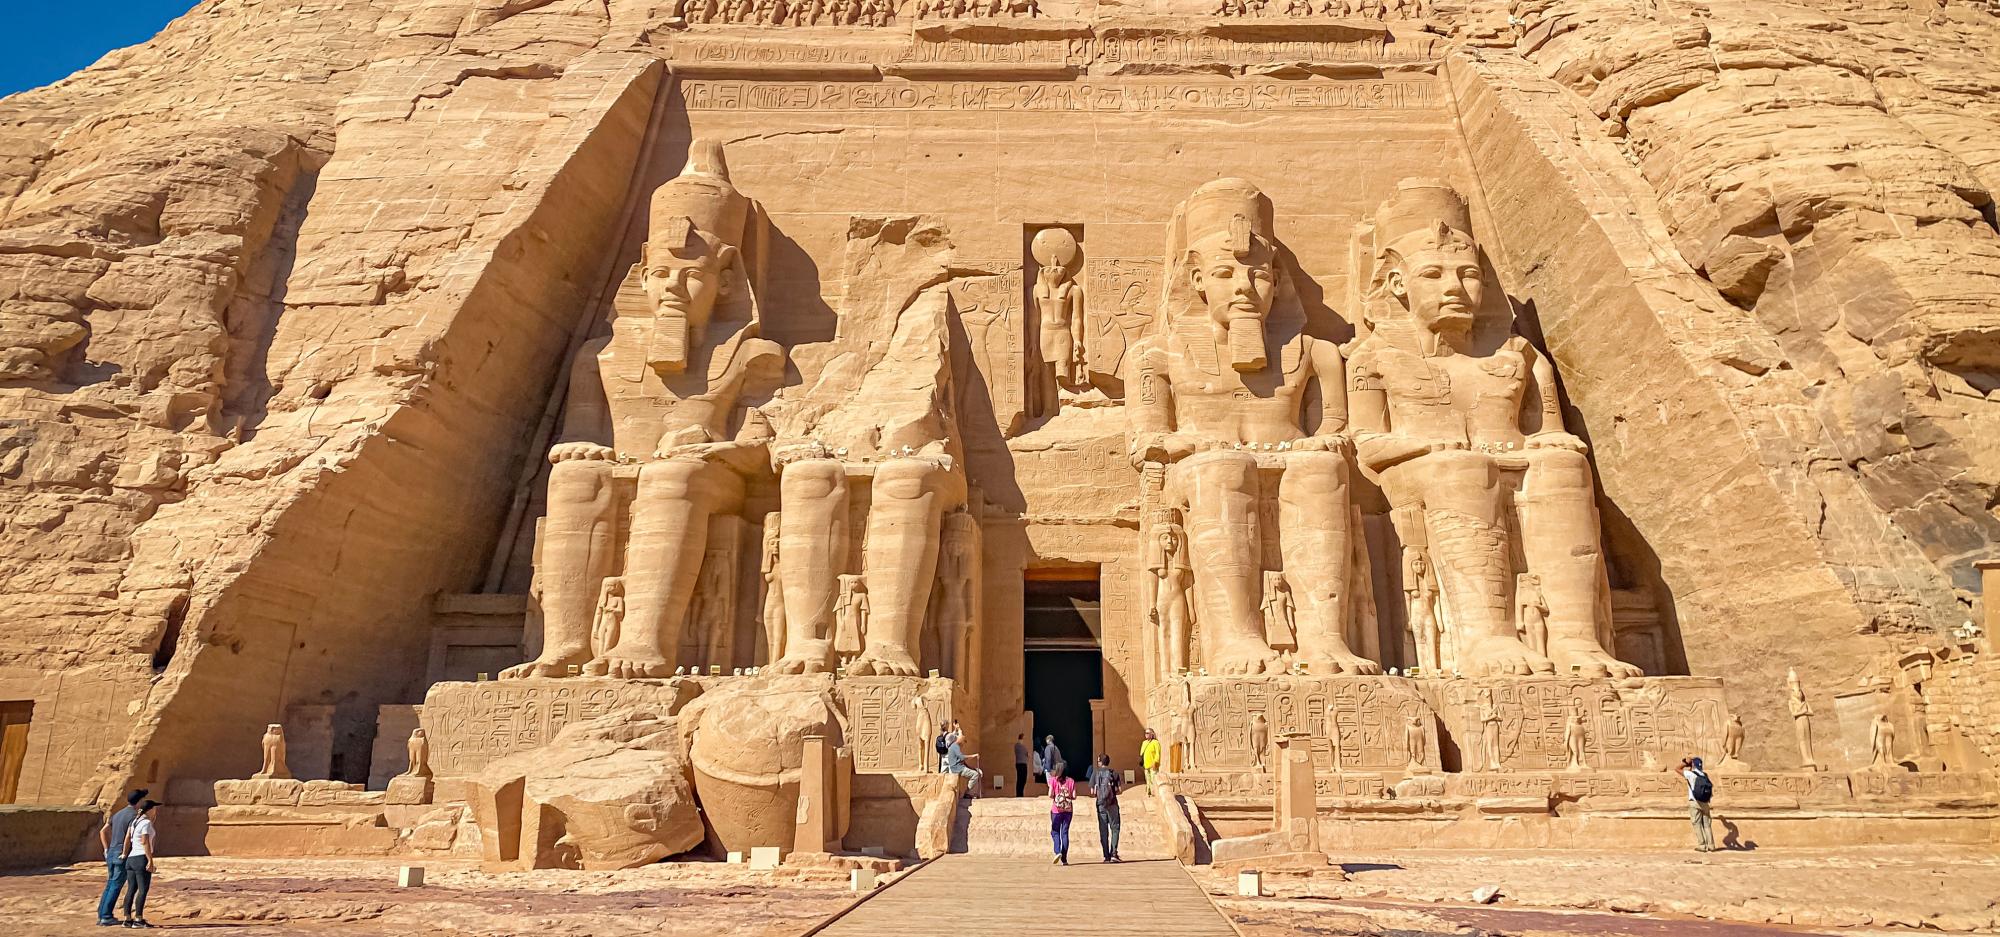 A photograph of Abu Simbel in Nubia, Egypt, where four massive statues of Ramses II sit on both sides of the entrance to a large temple cut into the site of a yellow-brown sandstone hill